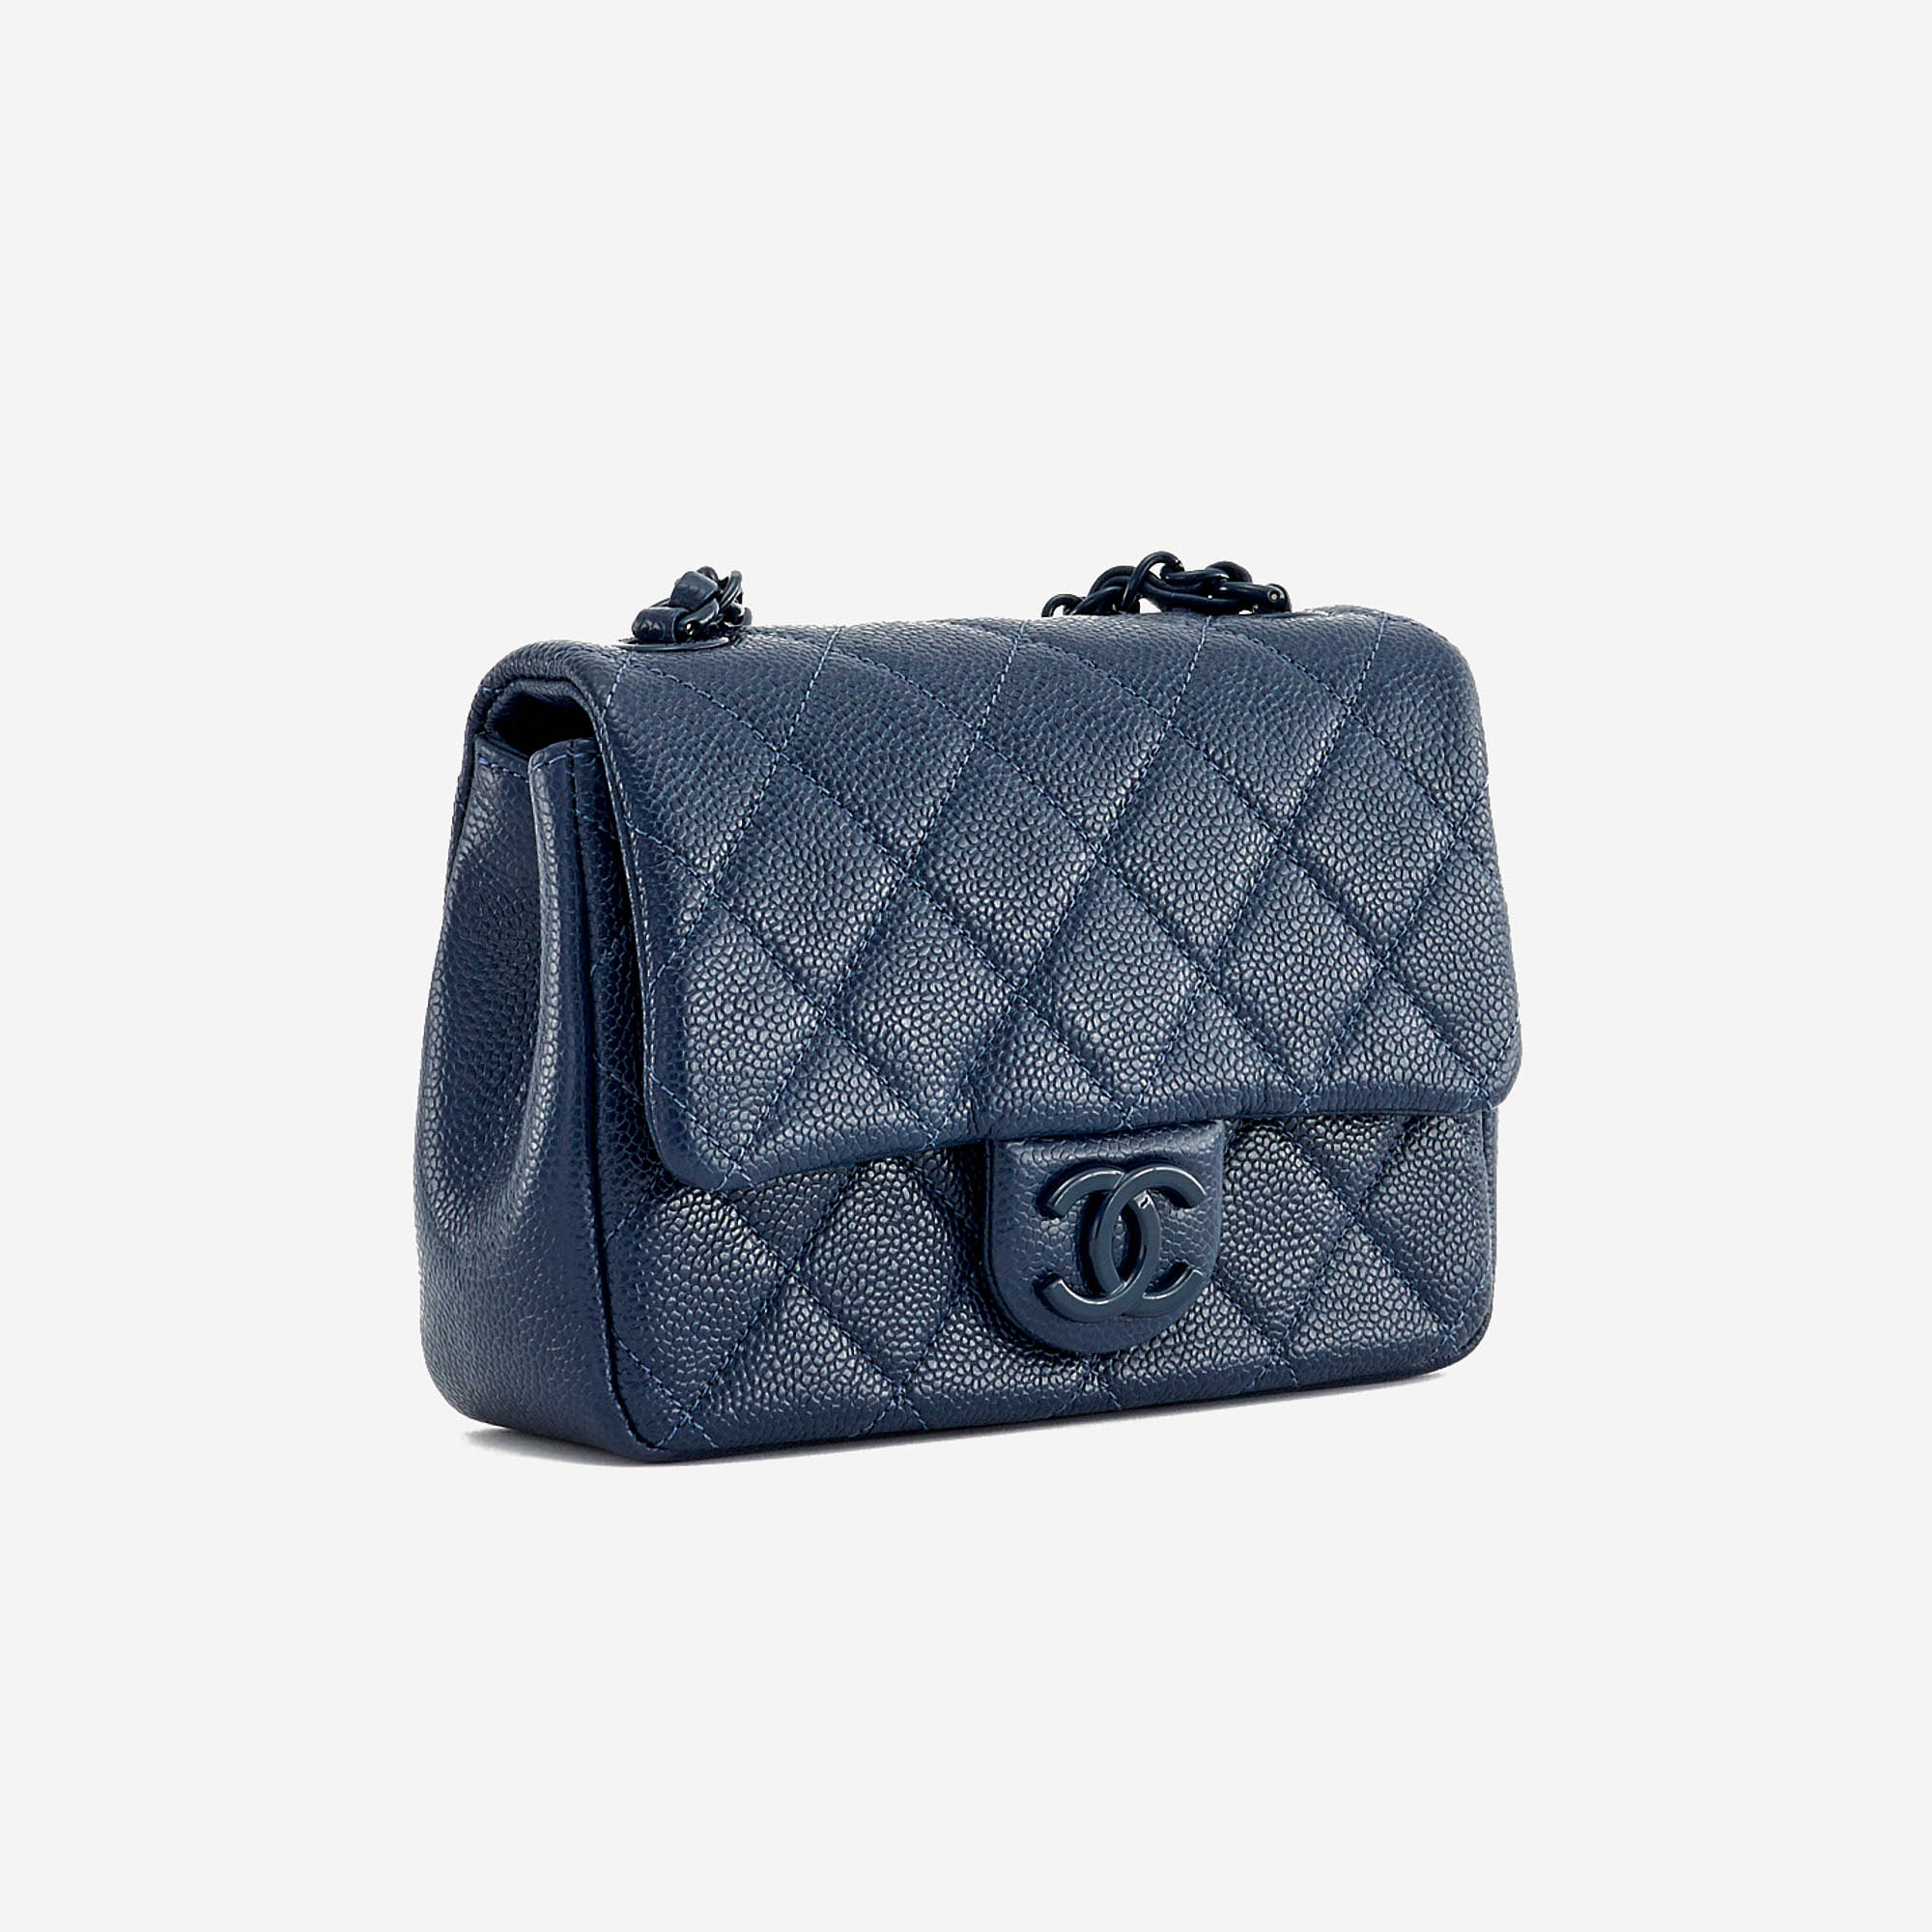 small chanel card holder wallet